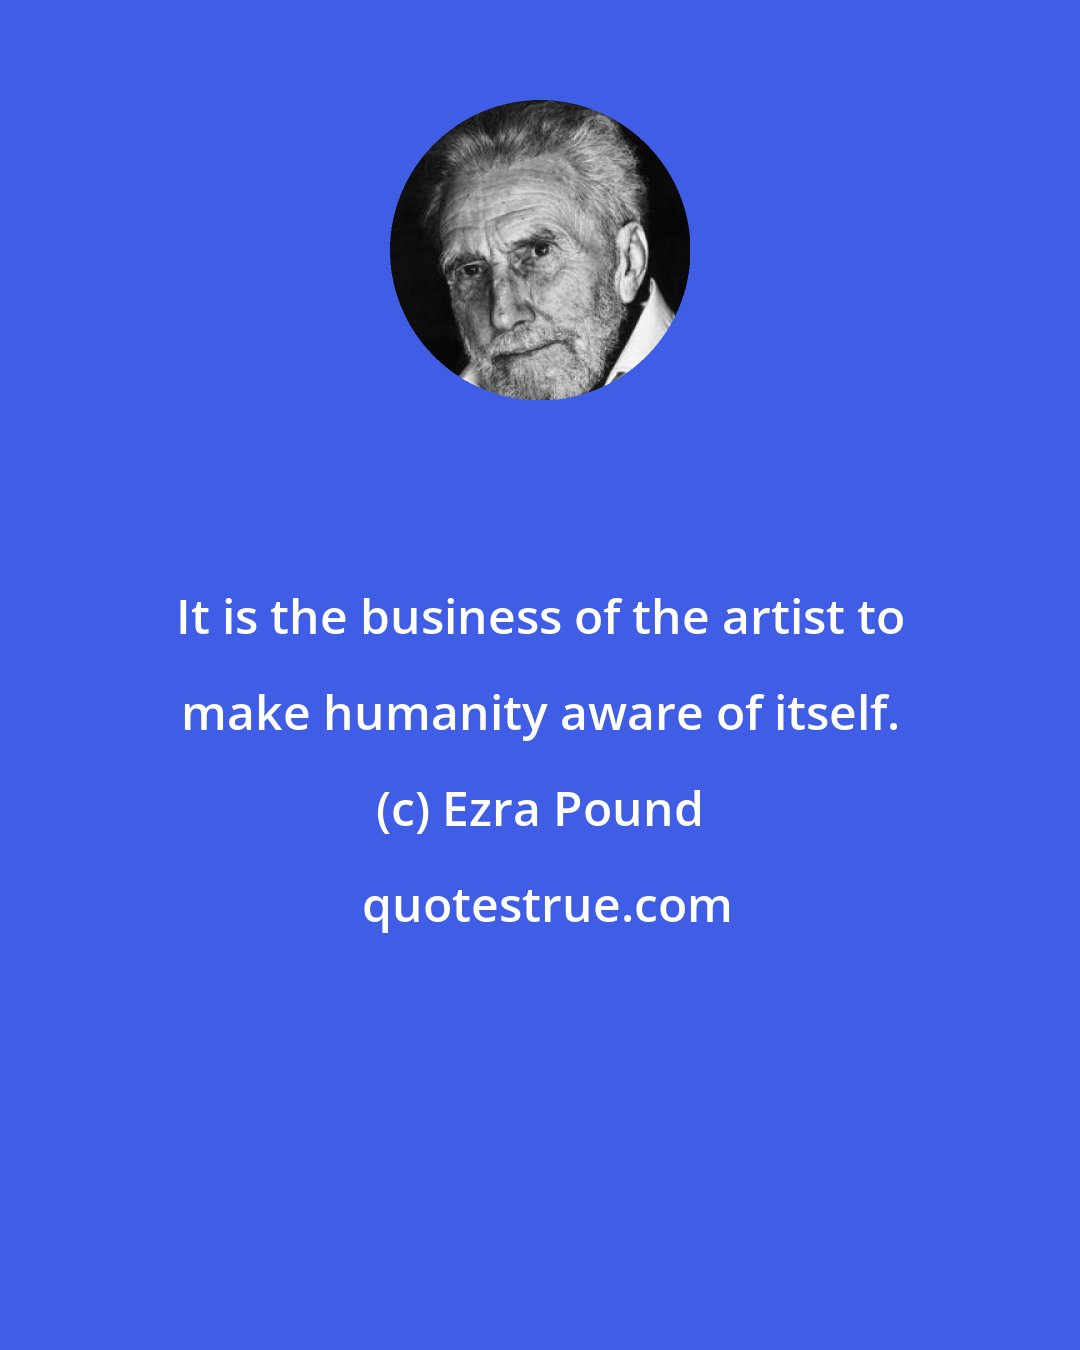 Ezra Pound: It is the business of the artist to make humanity aware of itself.